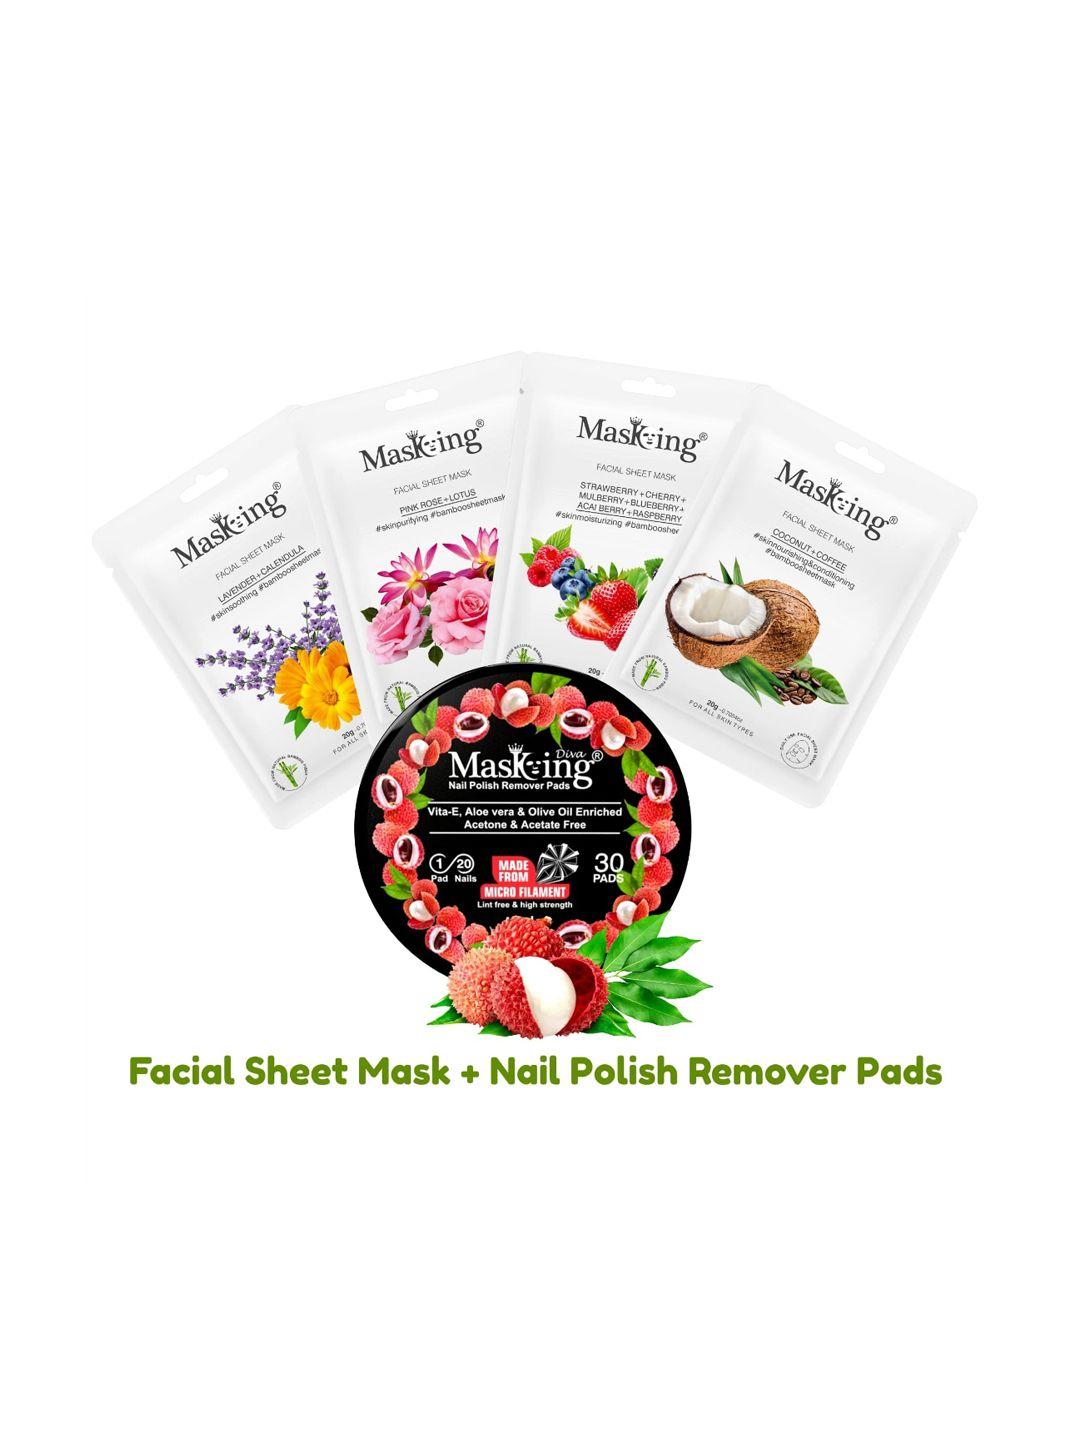 masking pack of 5 bamboo facial sheet mask for oil control & nail polish remover wipes